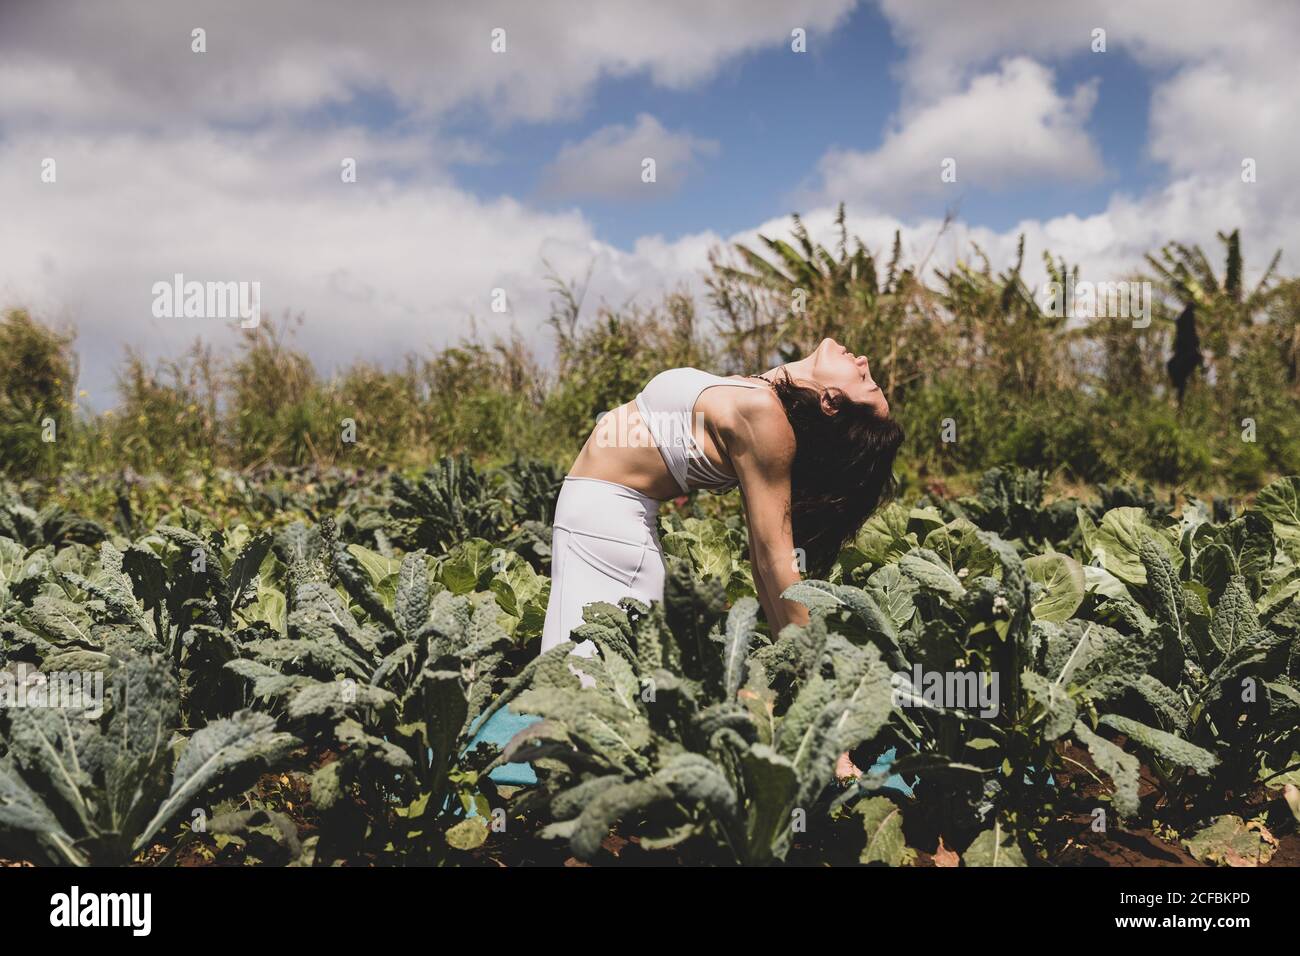 Female yogi backbends in a field of vegetables Stock Photo